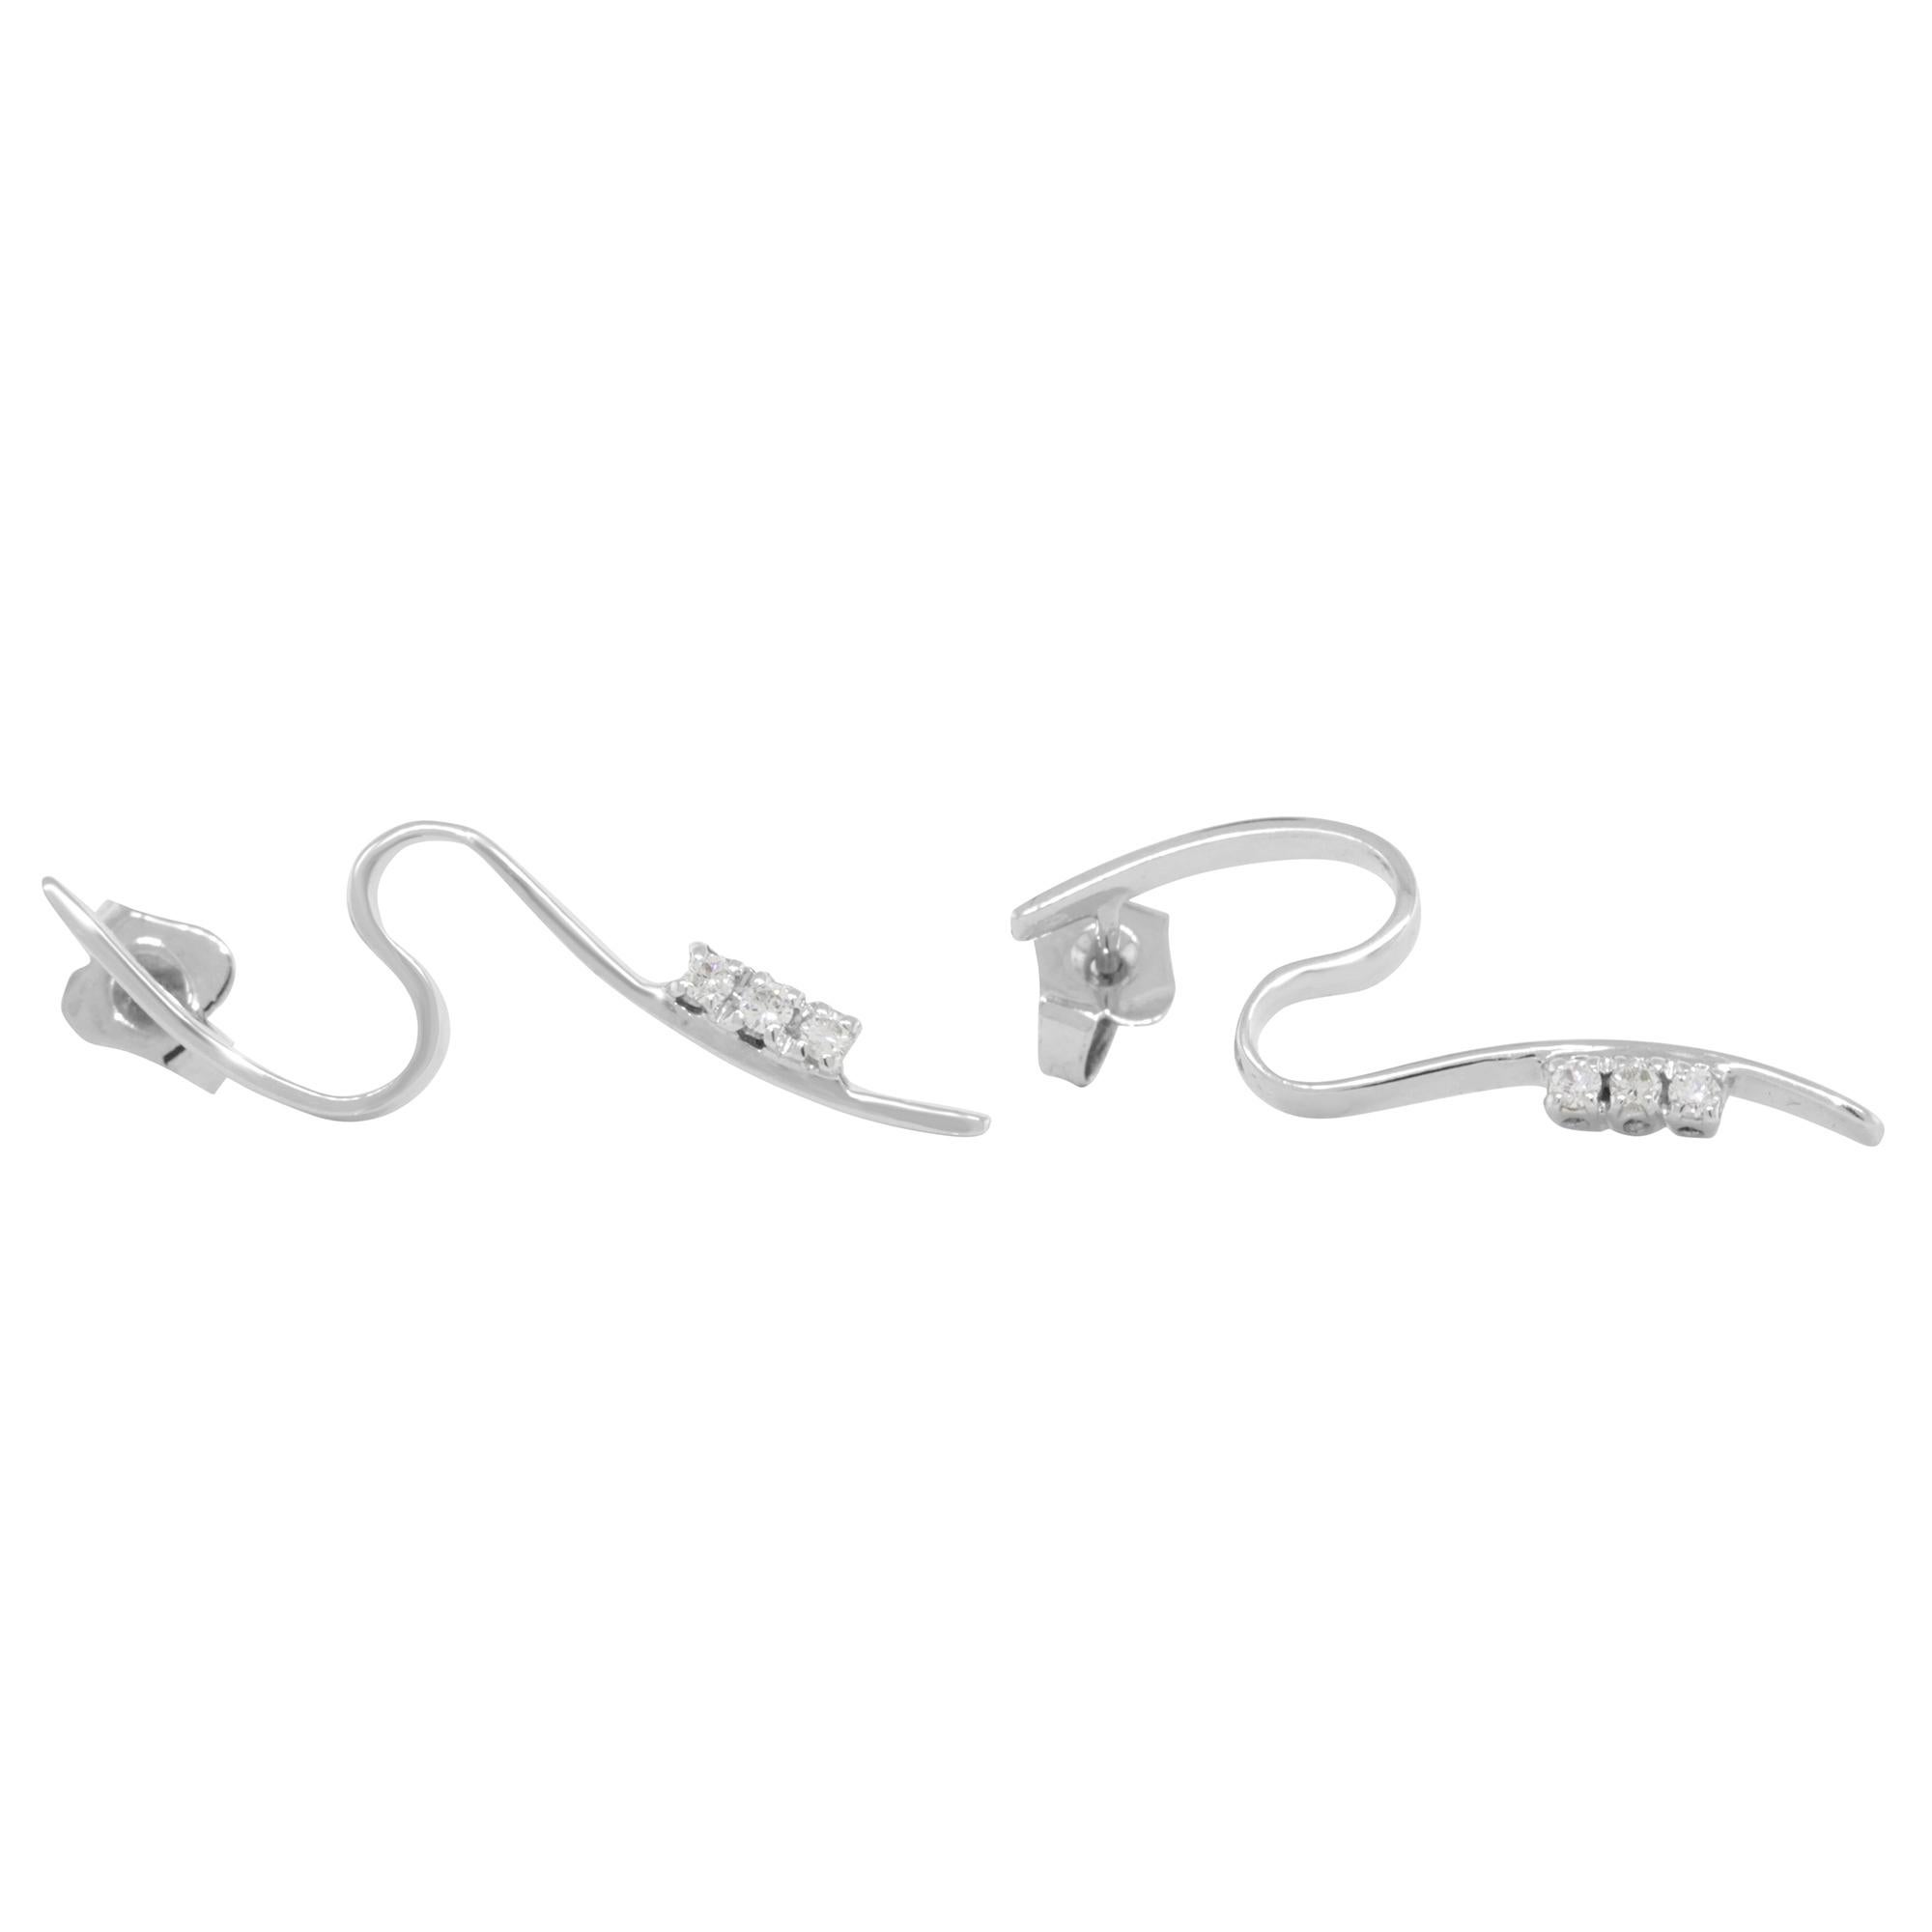 Feminine swirl and easy to wear these gorgeous diamond drop earrings are crafted in 18K white gold. These earrings make a perfect gift for Mother's Day or Birthday. Secured with push backings. The total diamond weight is 0.13ct. Earring length: 1.25